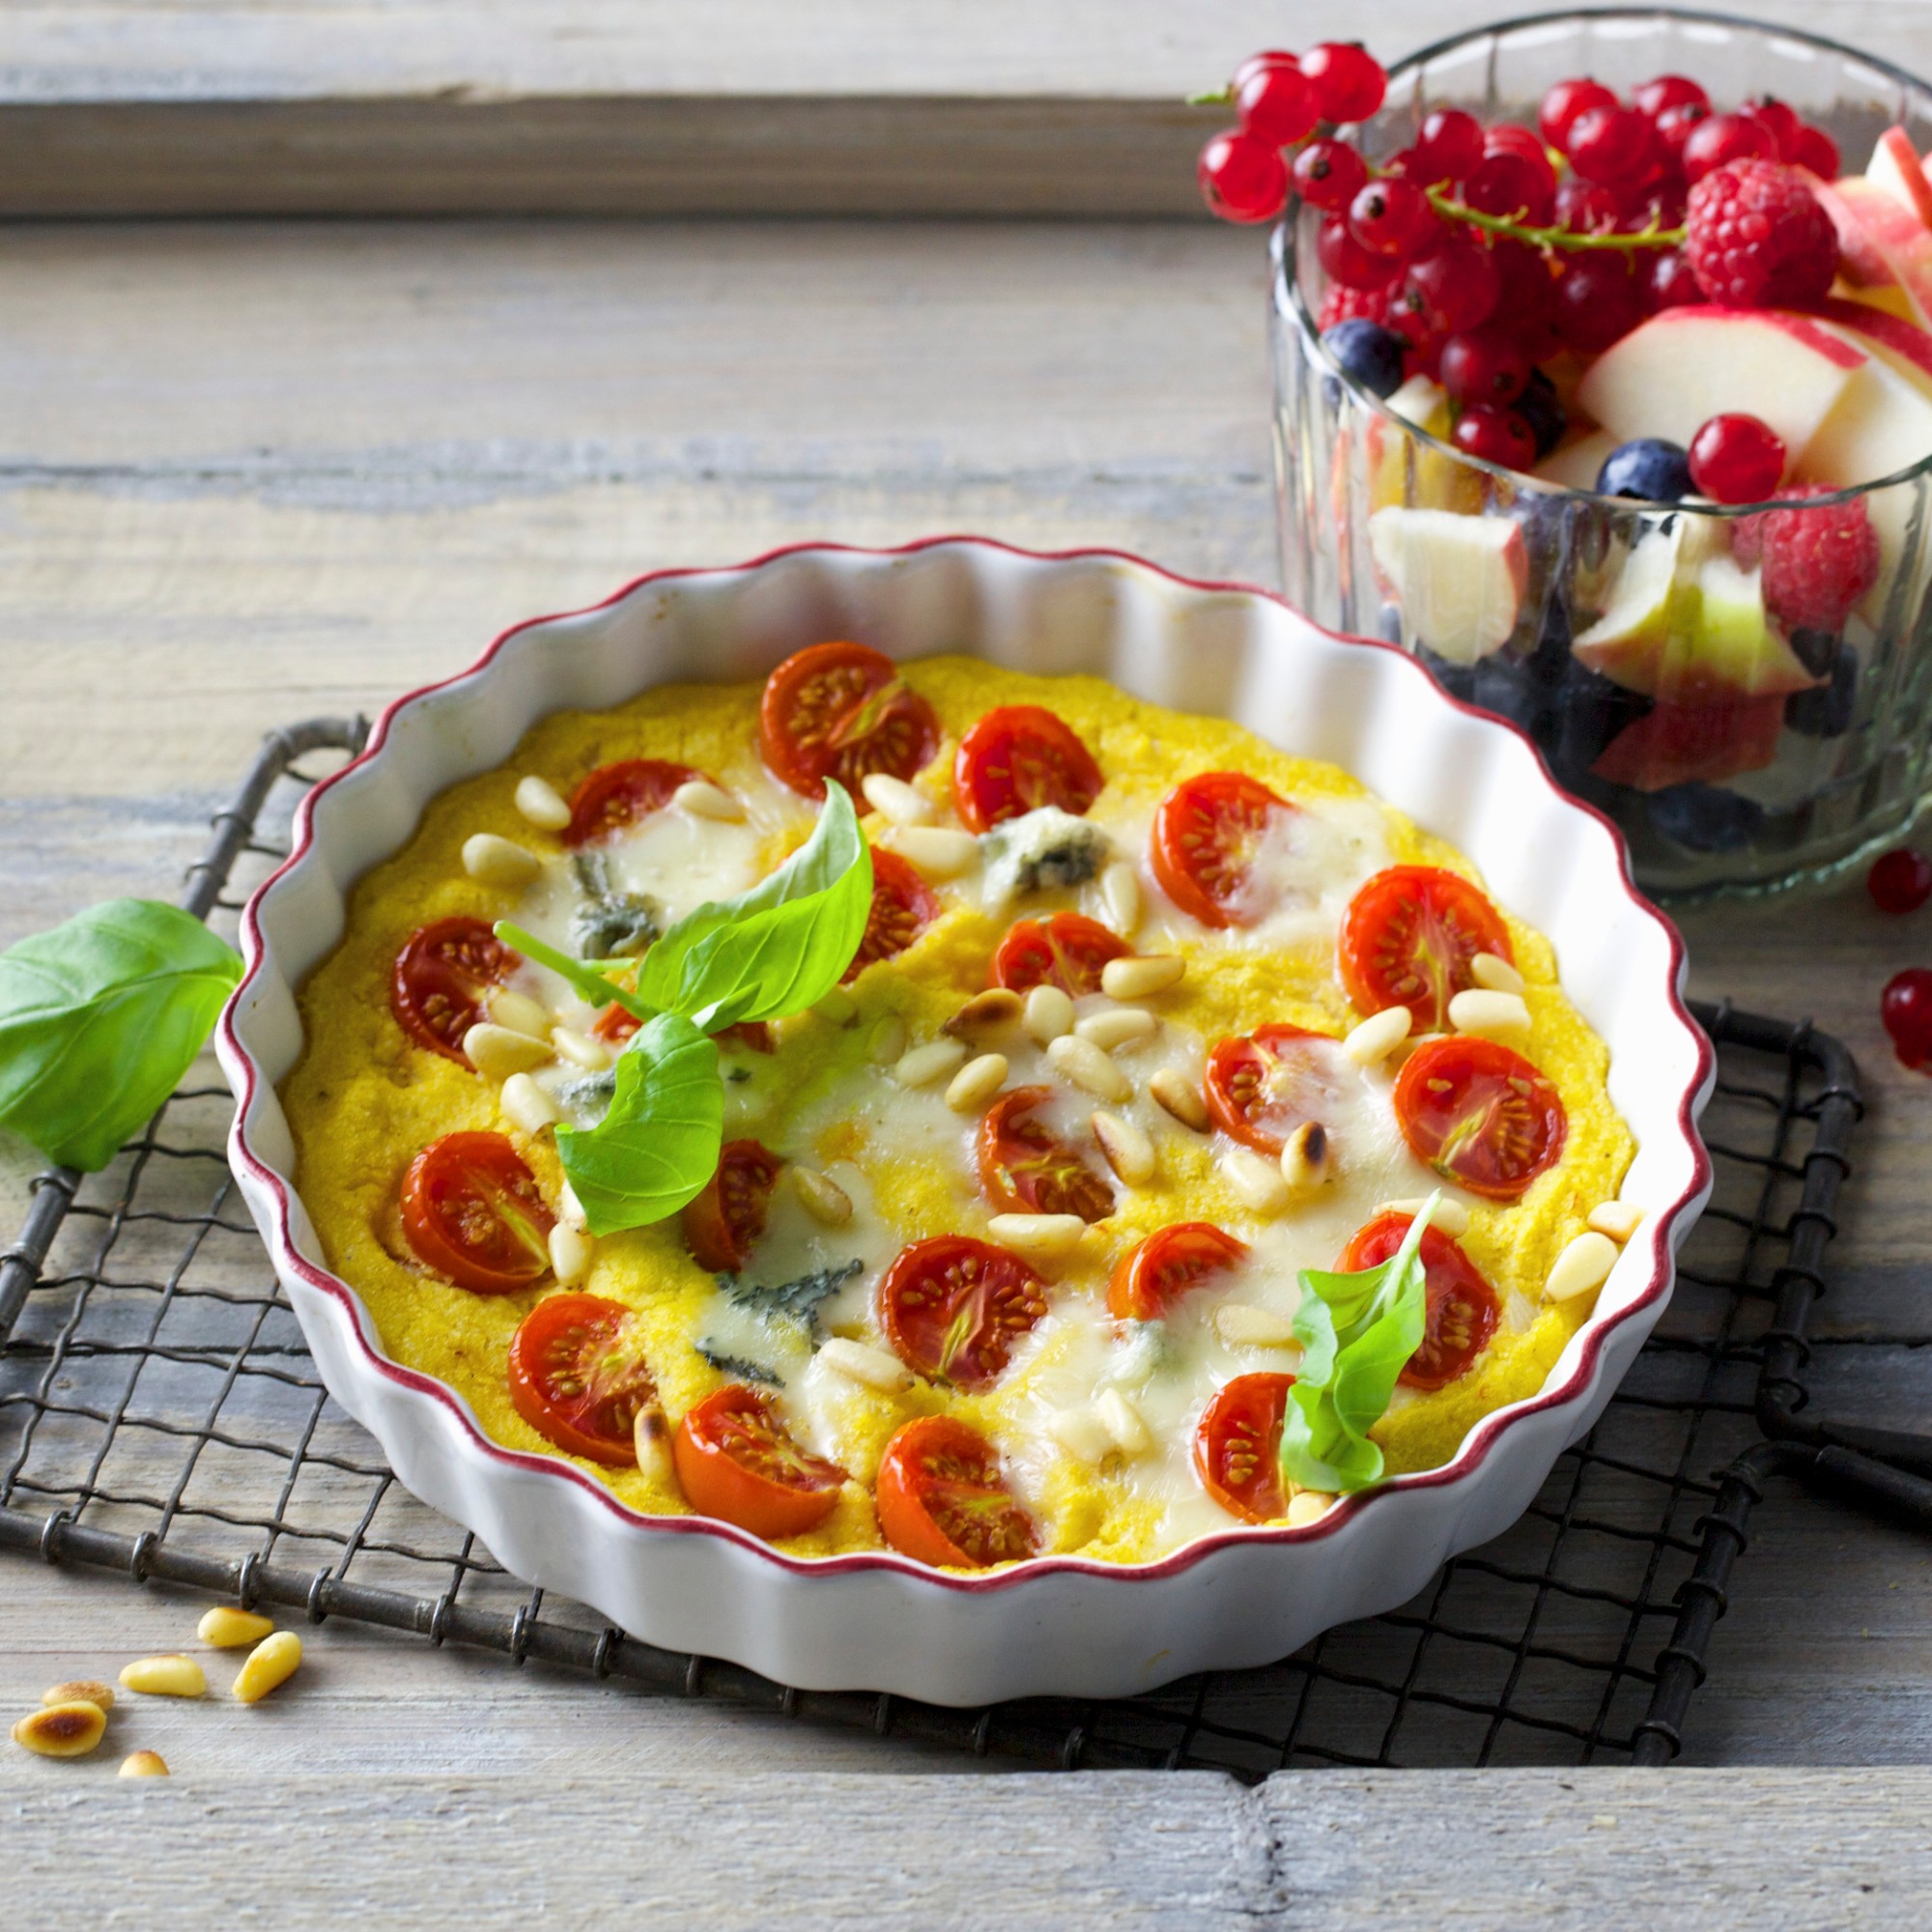 StockFood_11347859_HiRes_Onion_and_polenta_quiche_with_cherry_tomatoes_and_Gorgonzola